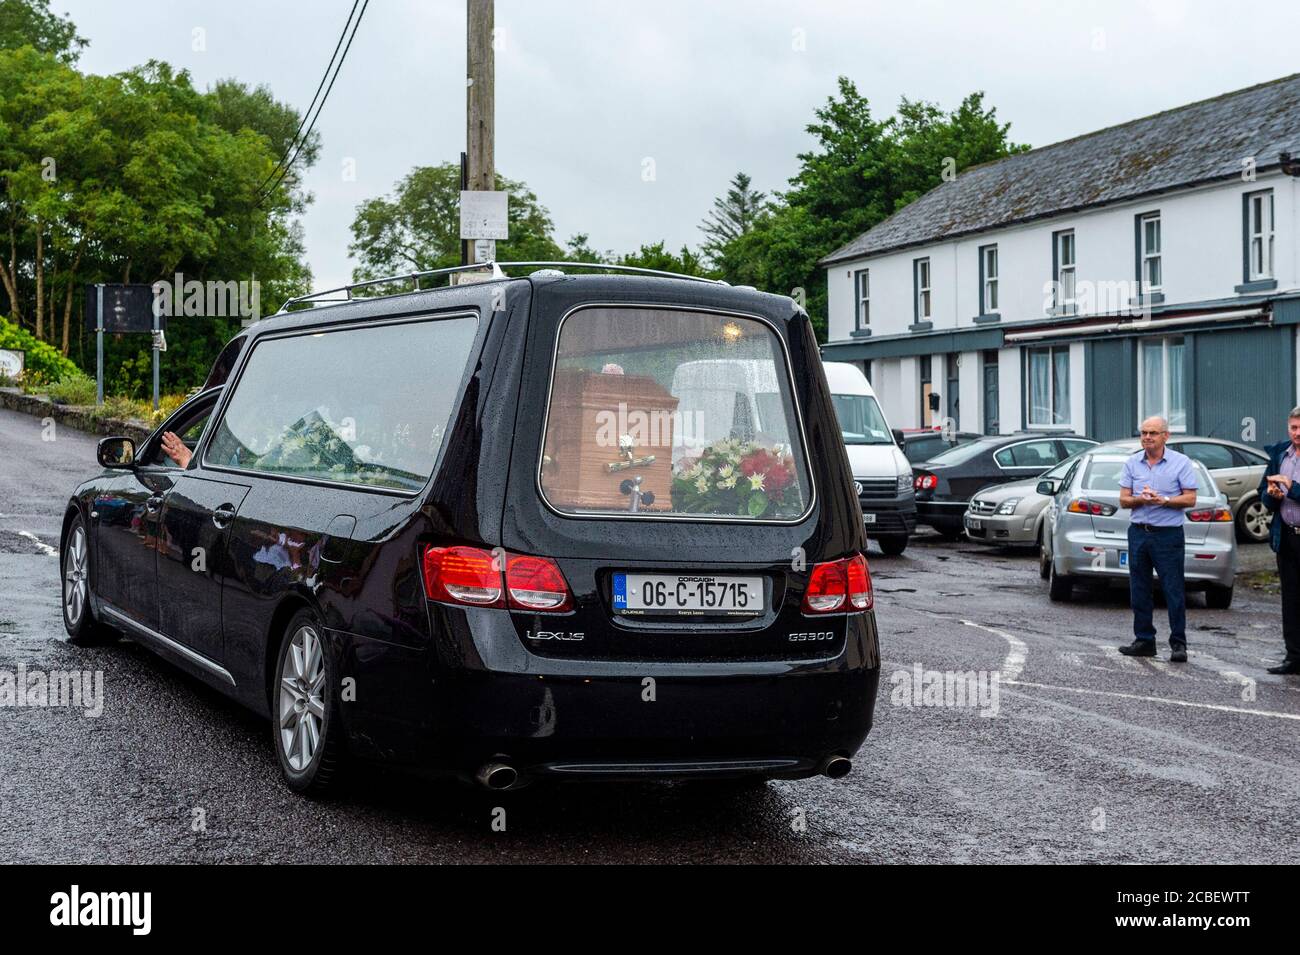 Durrus, West Cork, Ireland. 13th Aug, 2020. Ex Fine Gael TD Paddy Sheehan's funeral cortege passes through Durrus on its way to Mr. Sheehan's funeral service in Goleen, West Cork.  Around 50 people turned out to say a last goodbye to Mr. Sheehan, with people breaking into a round of applause as the hearse containing Mr. Sheehan's coffin passed. Credit: AG News/Alamy Live News Stock Photo